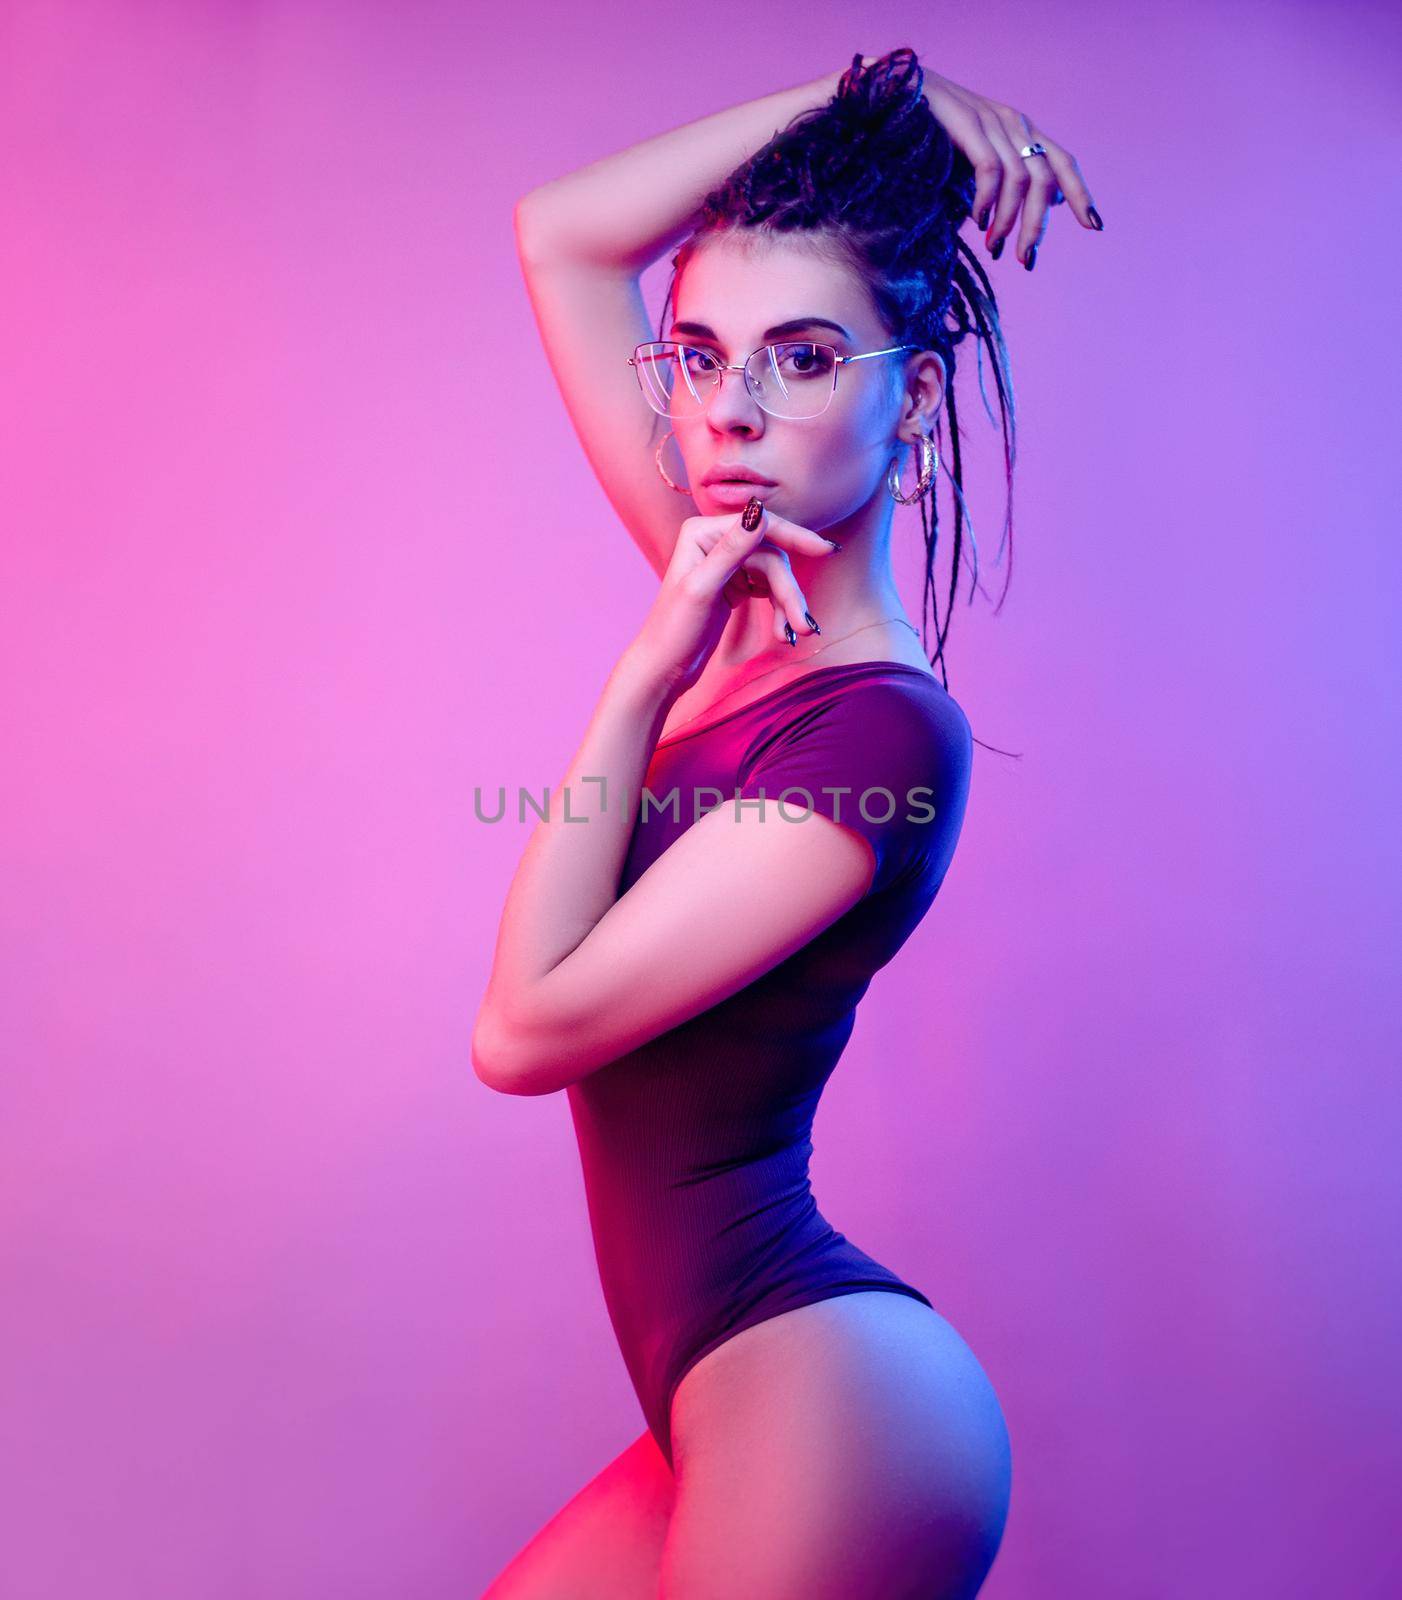 slender girl on a white background of neon color posing in a bodysuit by Rotozey